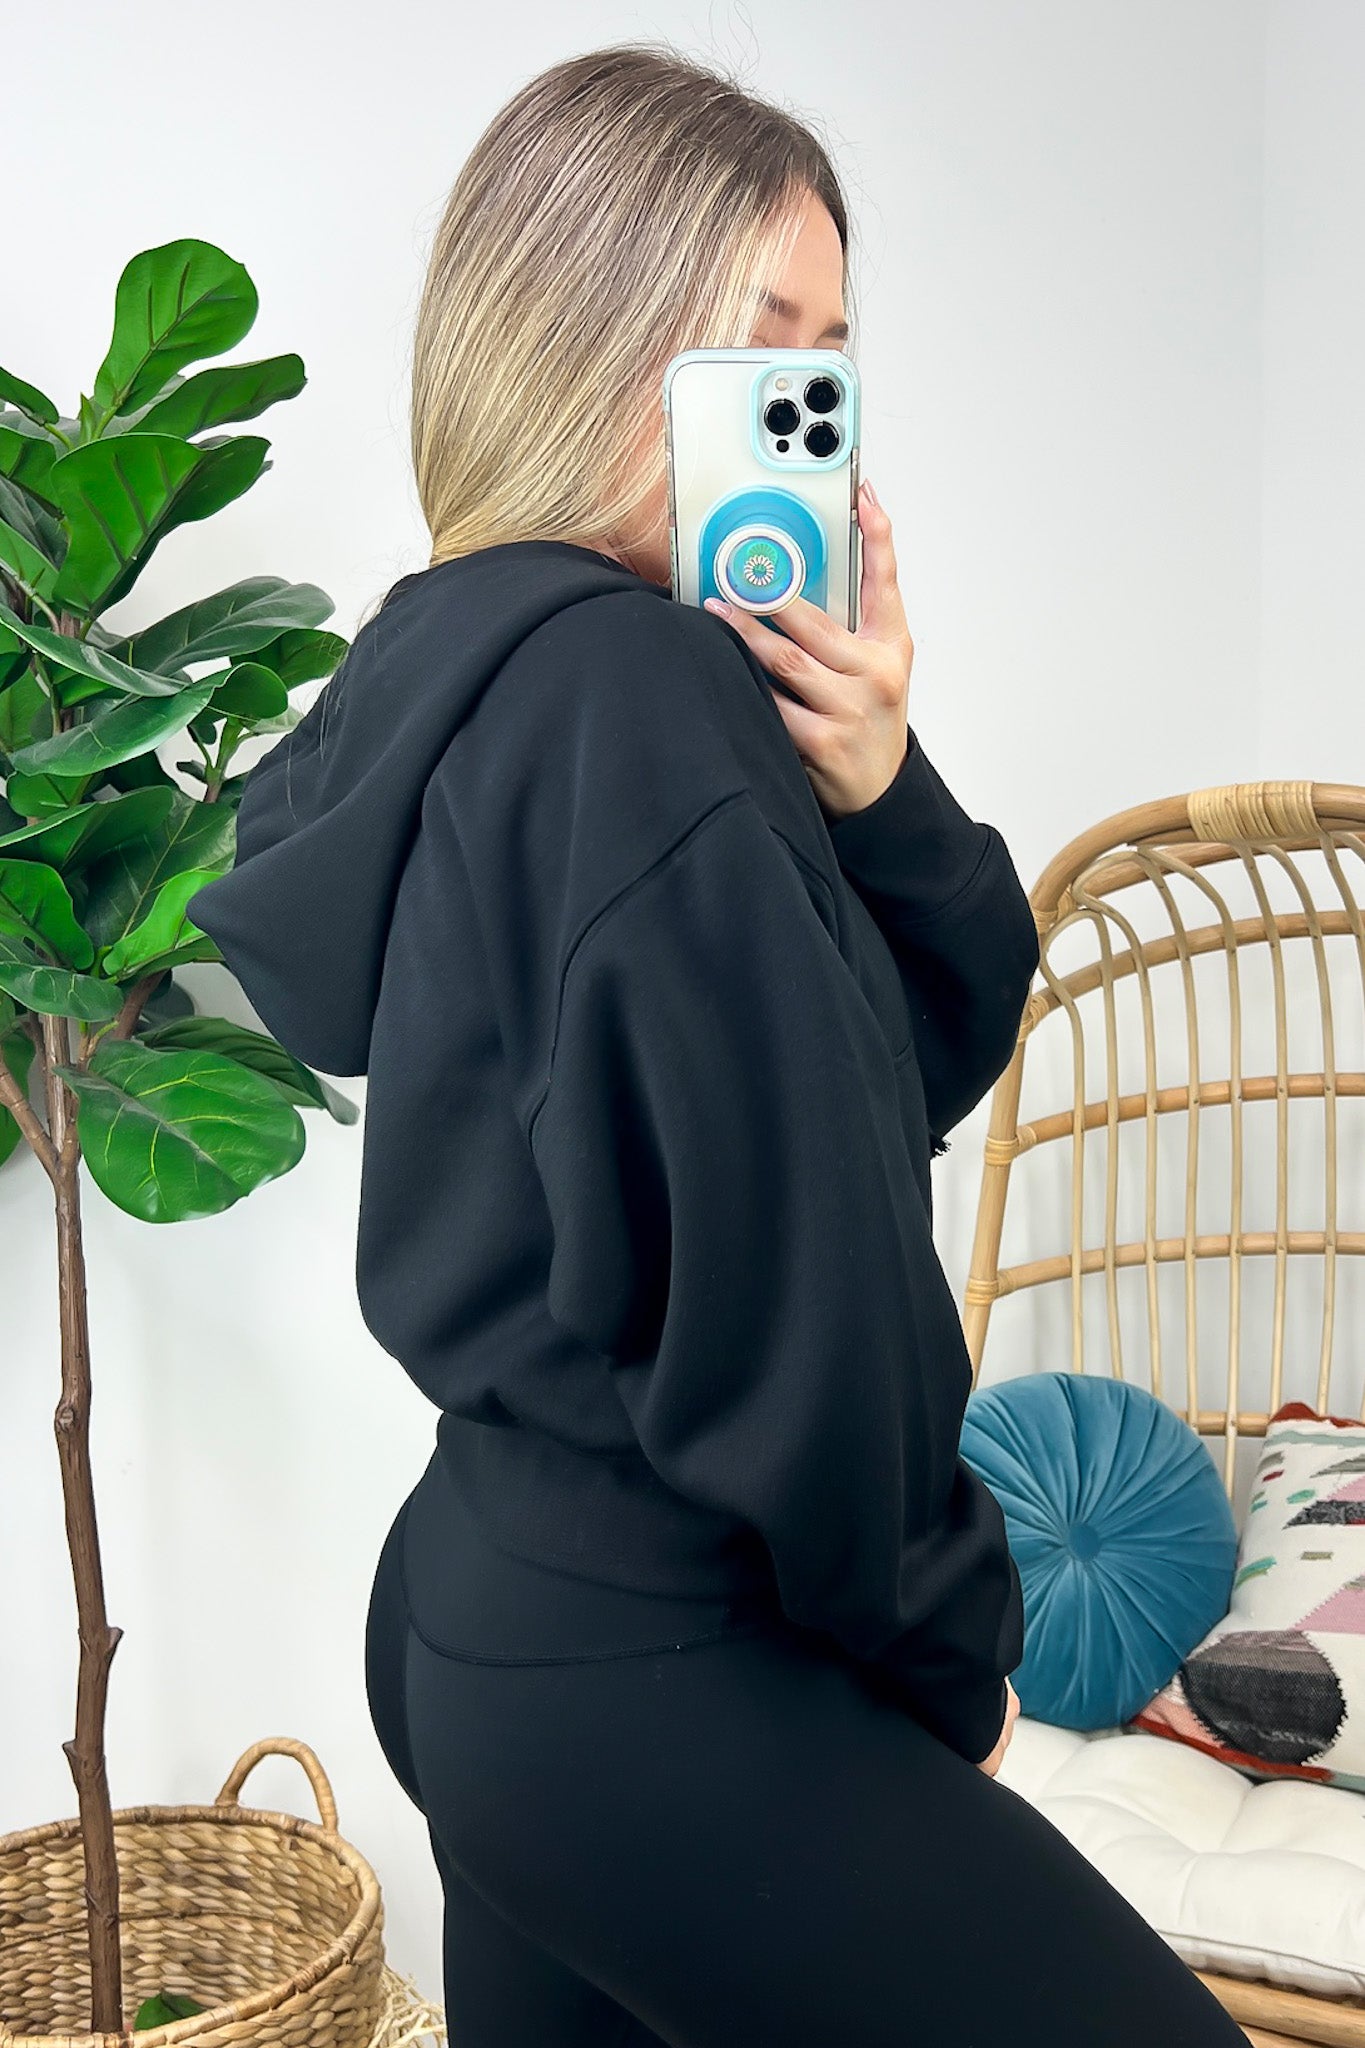  Adrinah Fleece Cropped Hoodie - FINAL SALE - Madison and Mallory